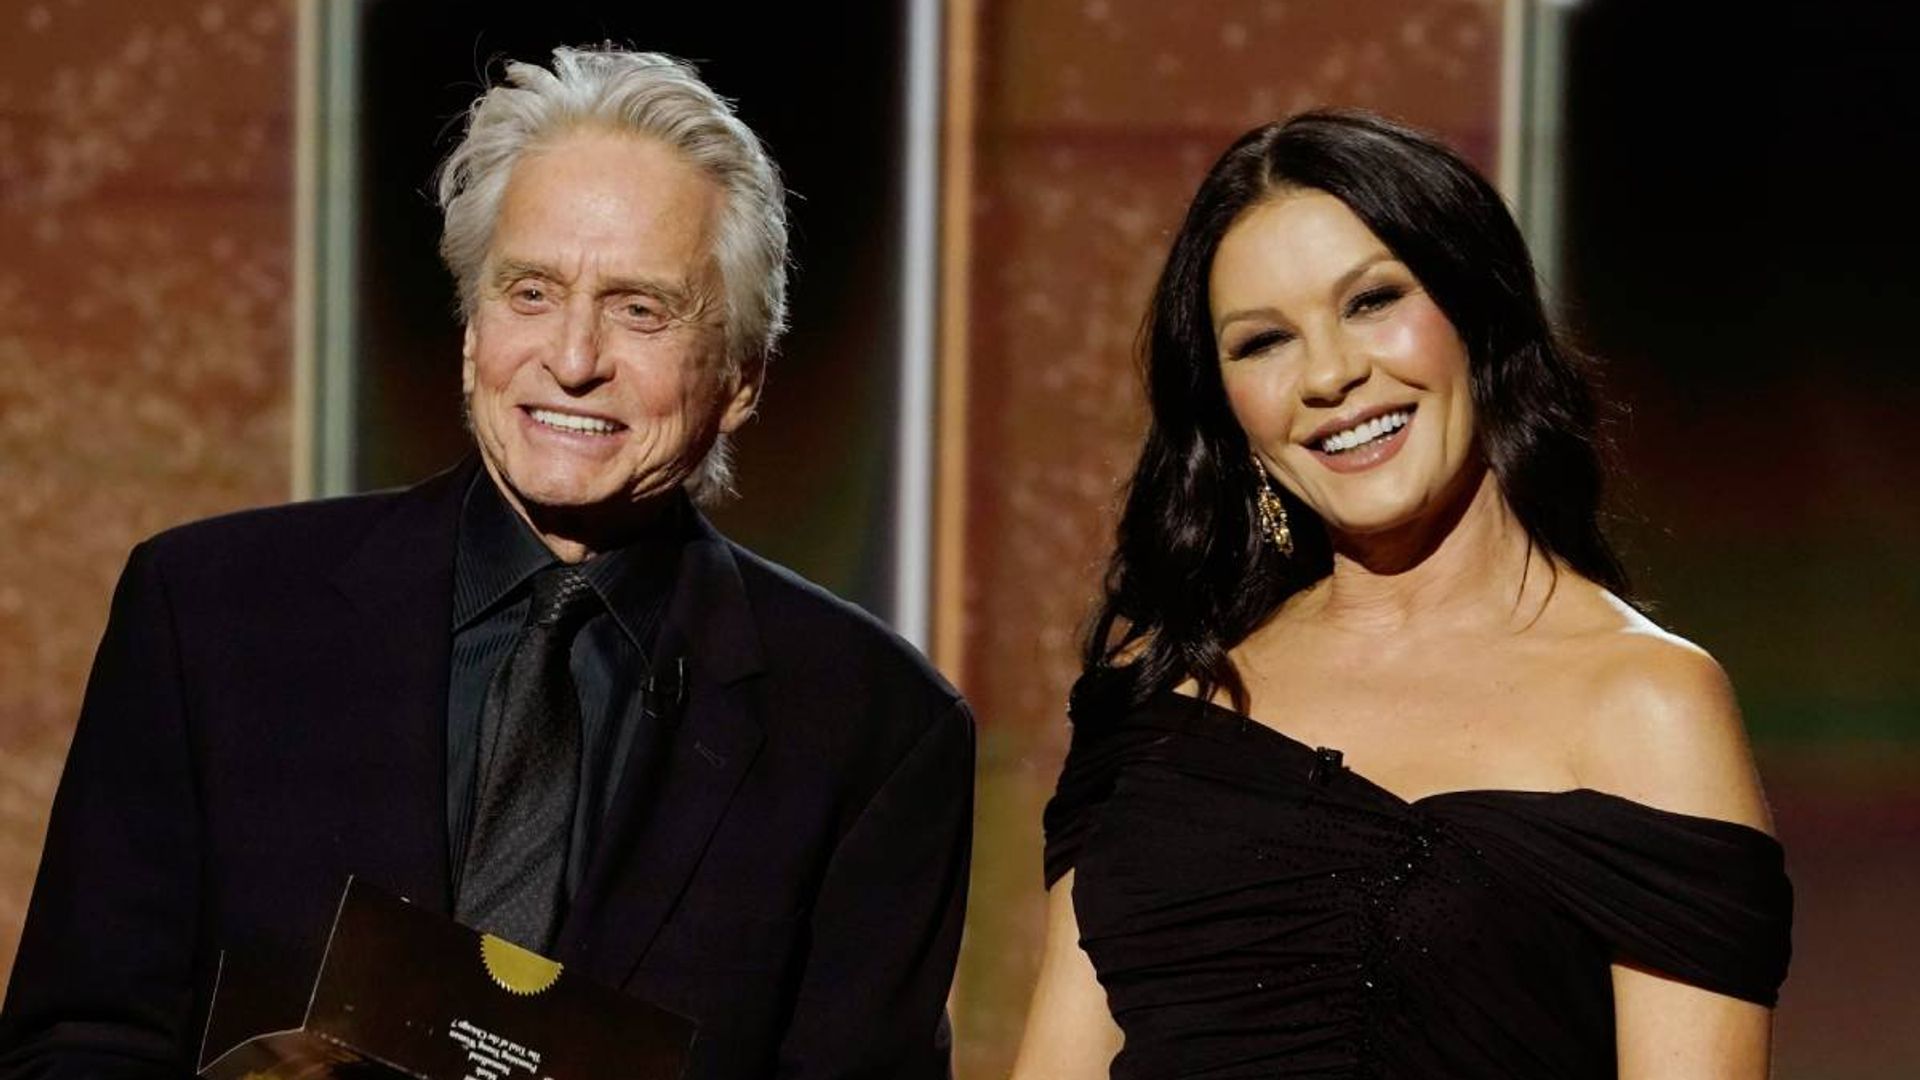 Catherine Zeta-Jones and Michael Douglas shower each other with love on Instagram - see the fabulous gift he got her